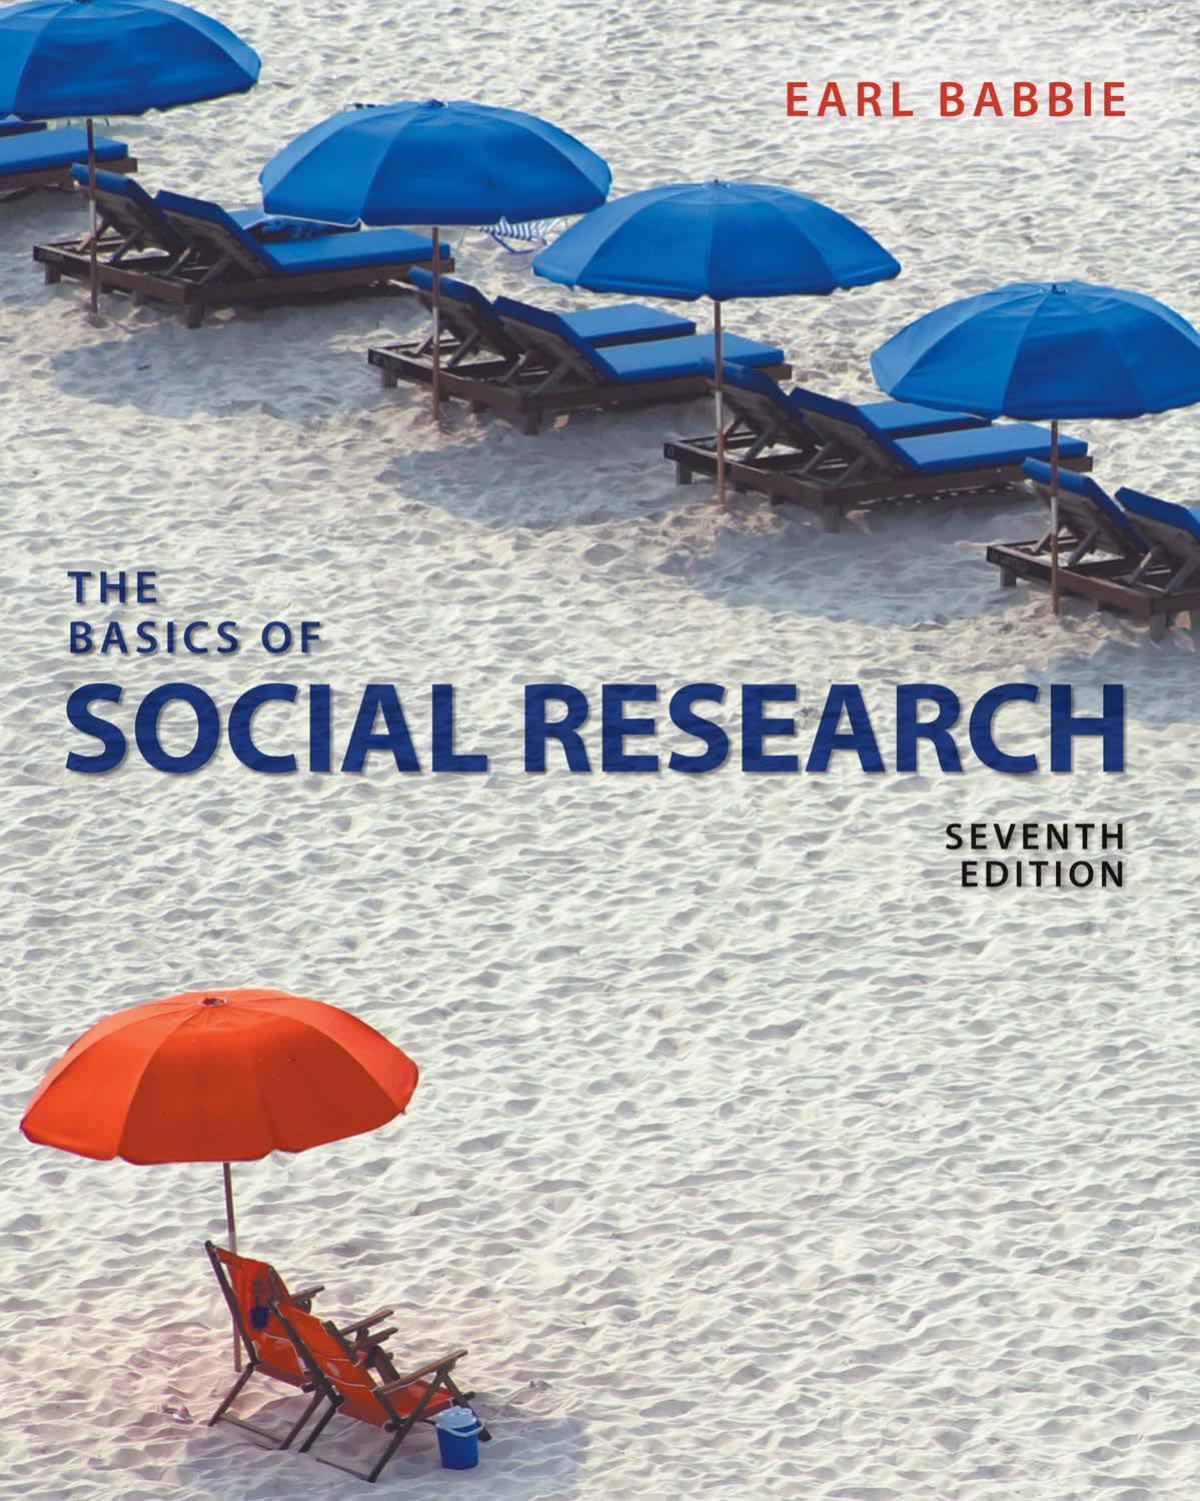 Test Bank for Basics of Social Research 7th edition by Earl Babbie 